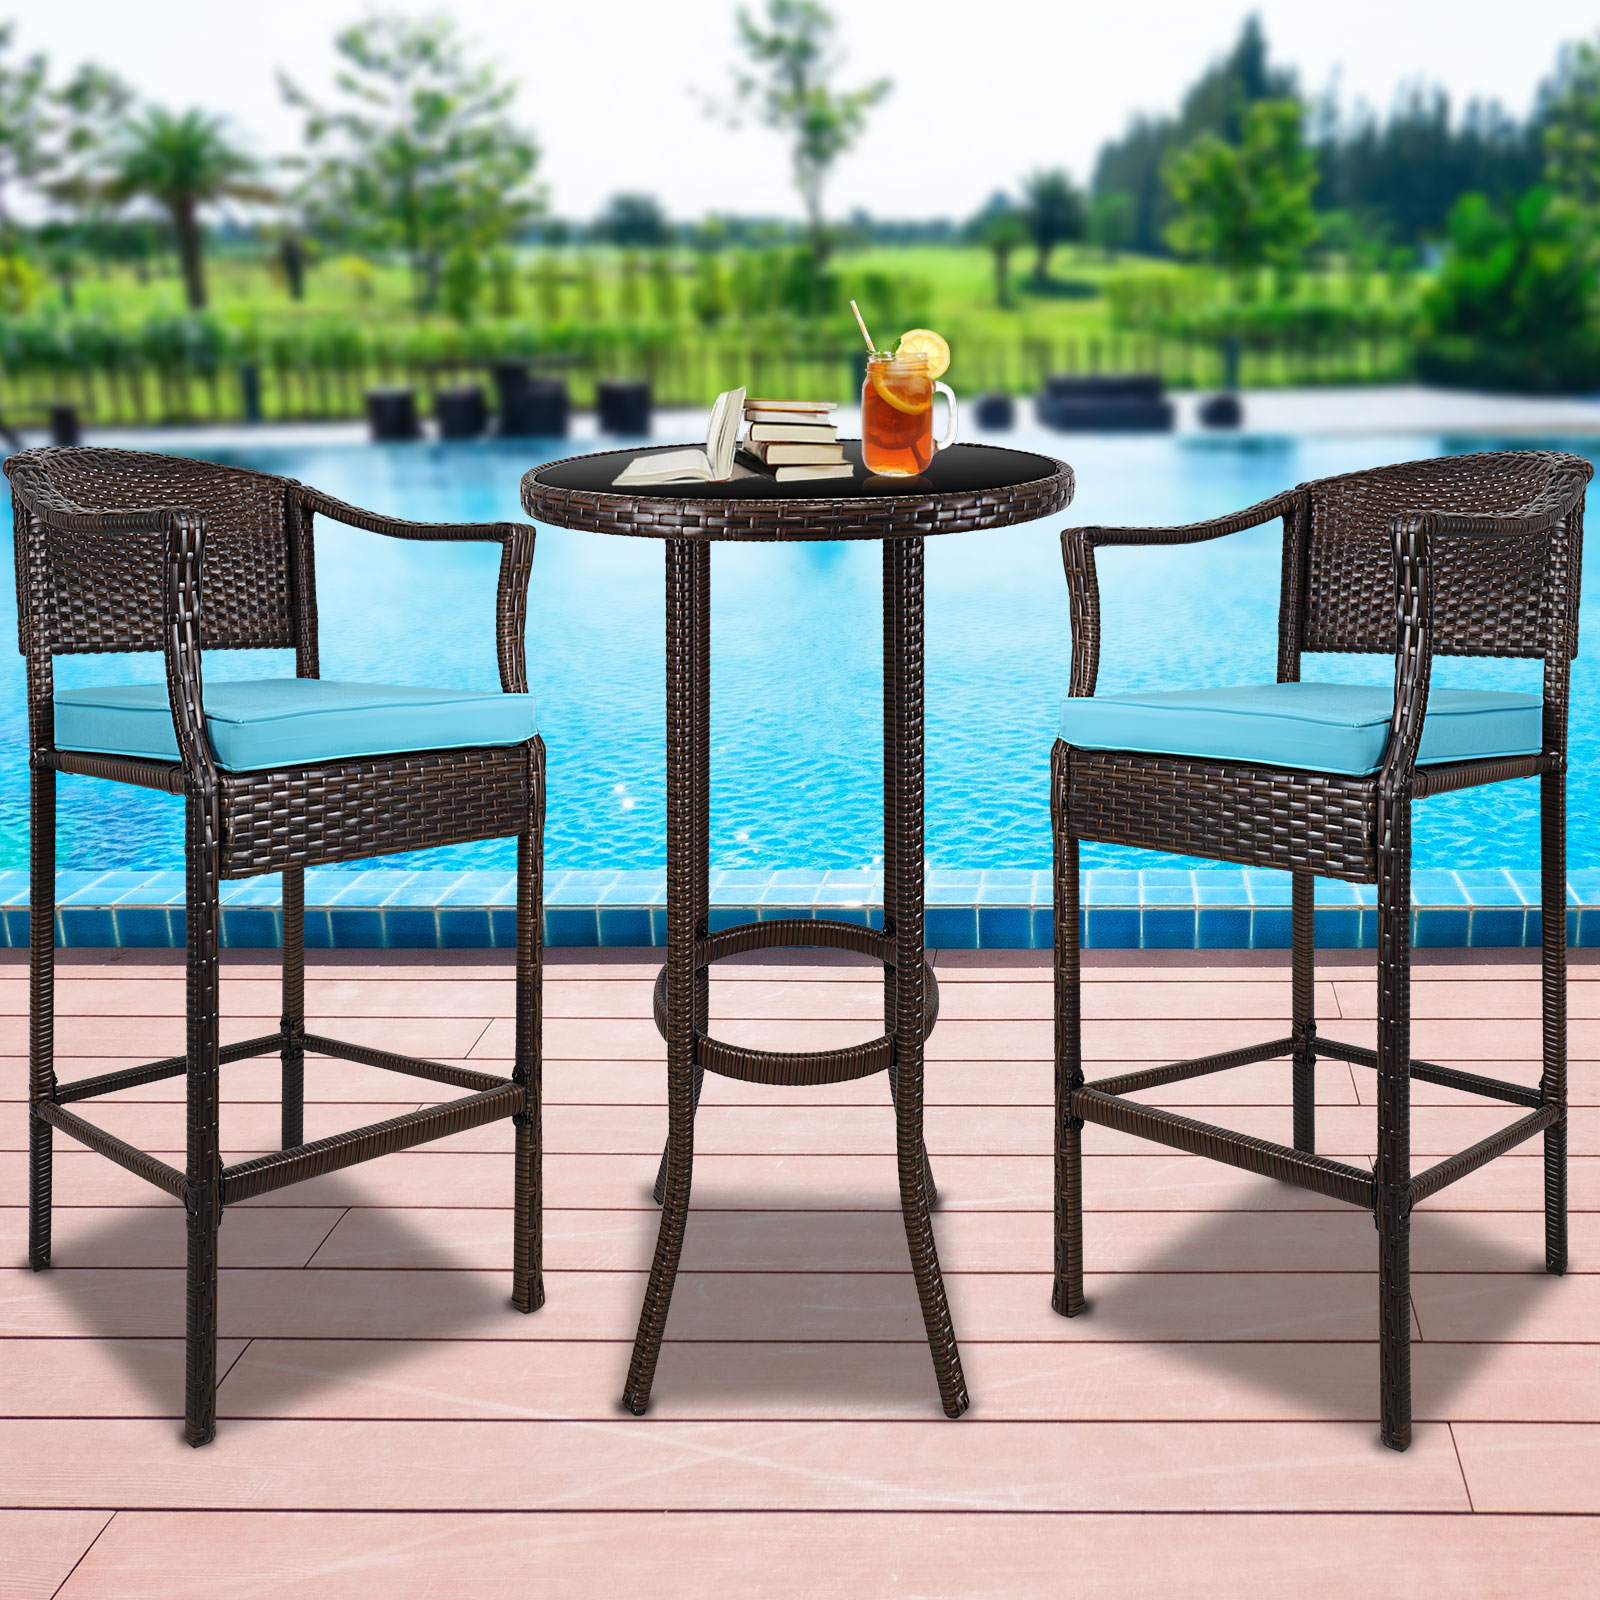 Outdoor High Top Table and Chair, Patio Furniture High Top Table Set with Glass Coffee Table, Removable Cushions, Outdoor Bar Table with Chair, Patio Bistro Set for Backyard Poolside Balcony, Q17052 - image 4 of 13